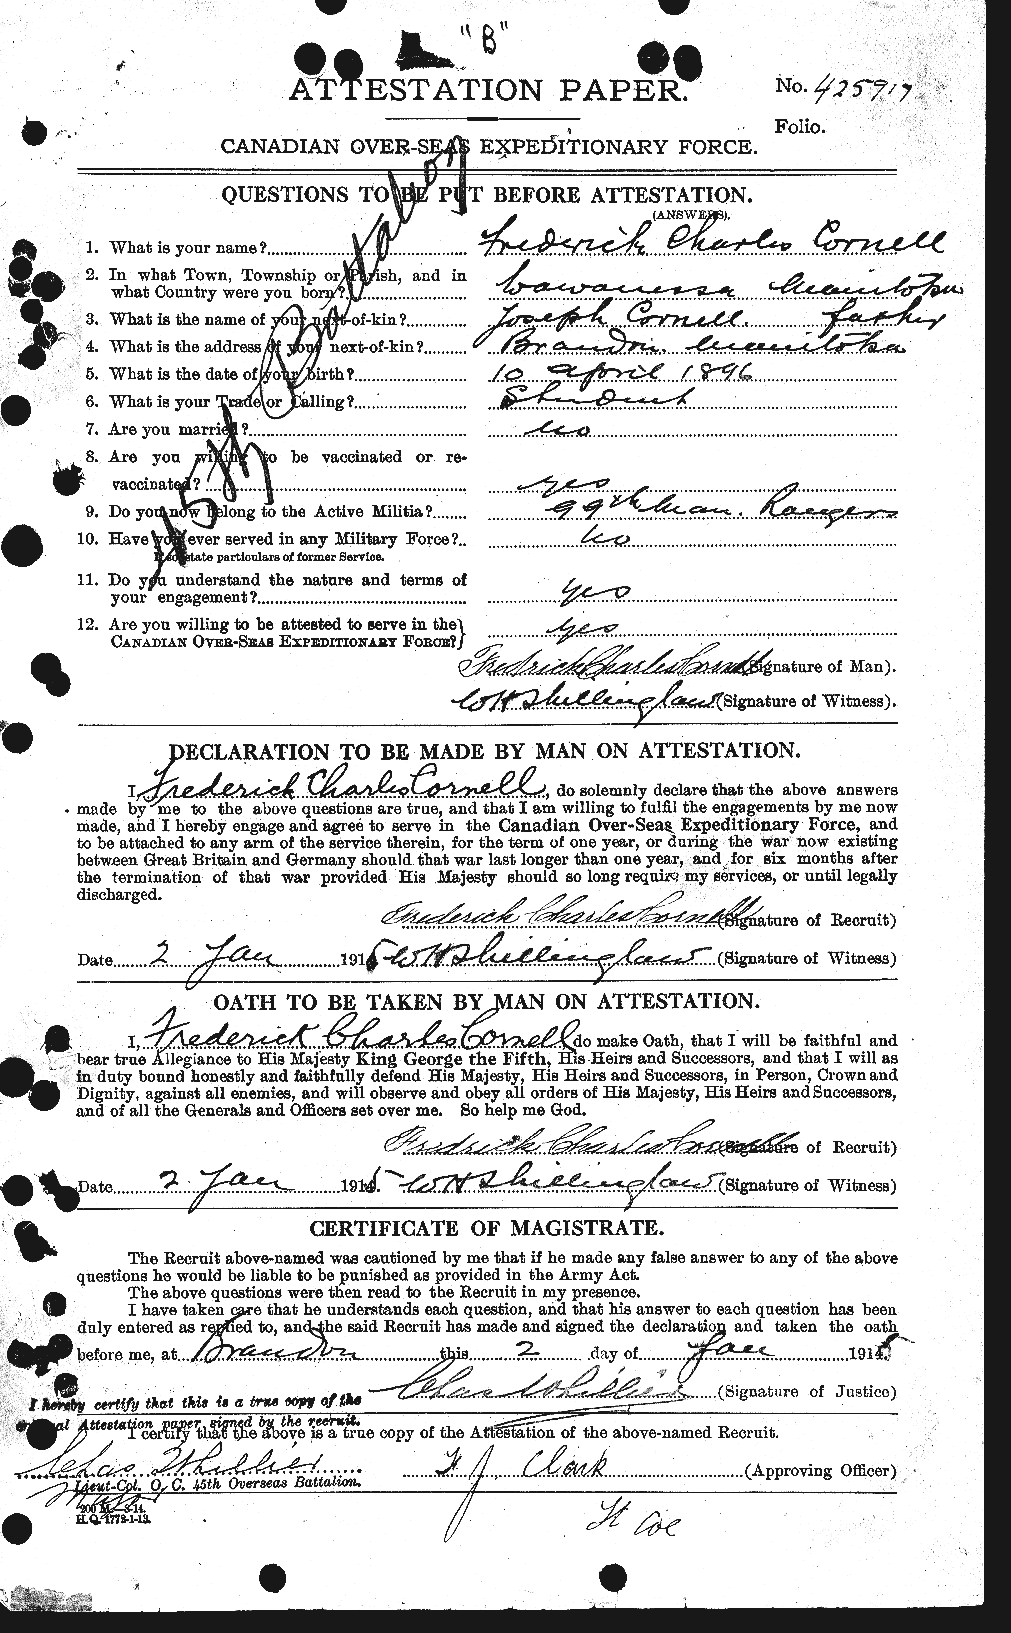 Personnel Records of the First World War - CEF 056621a